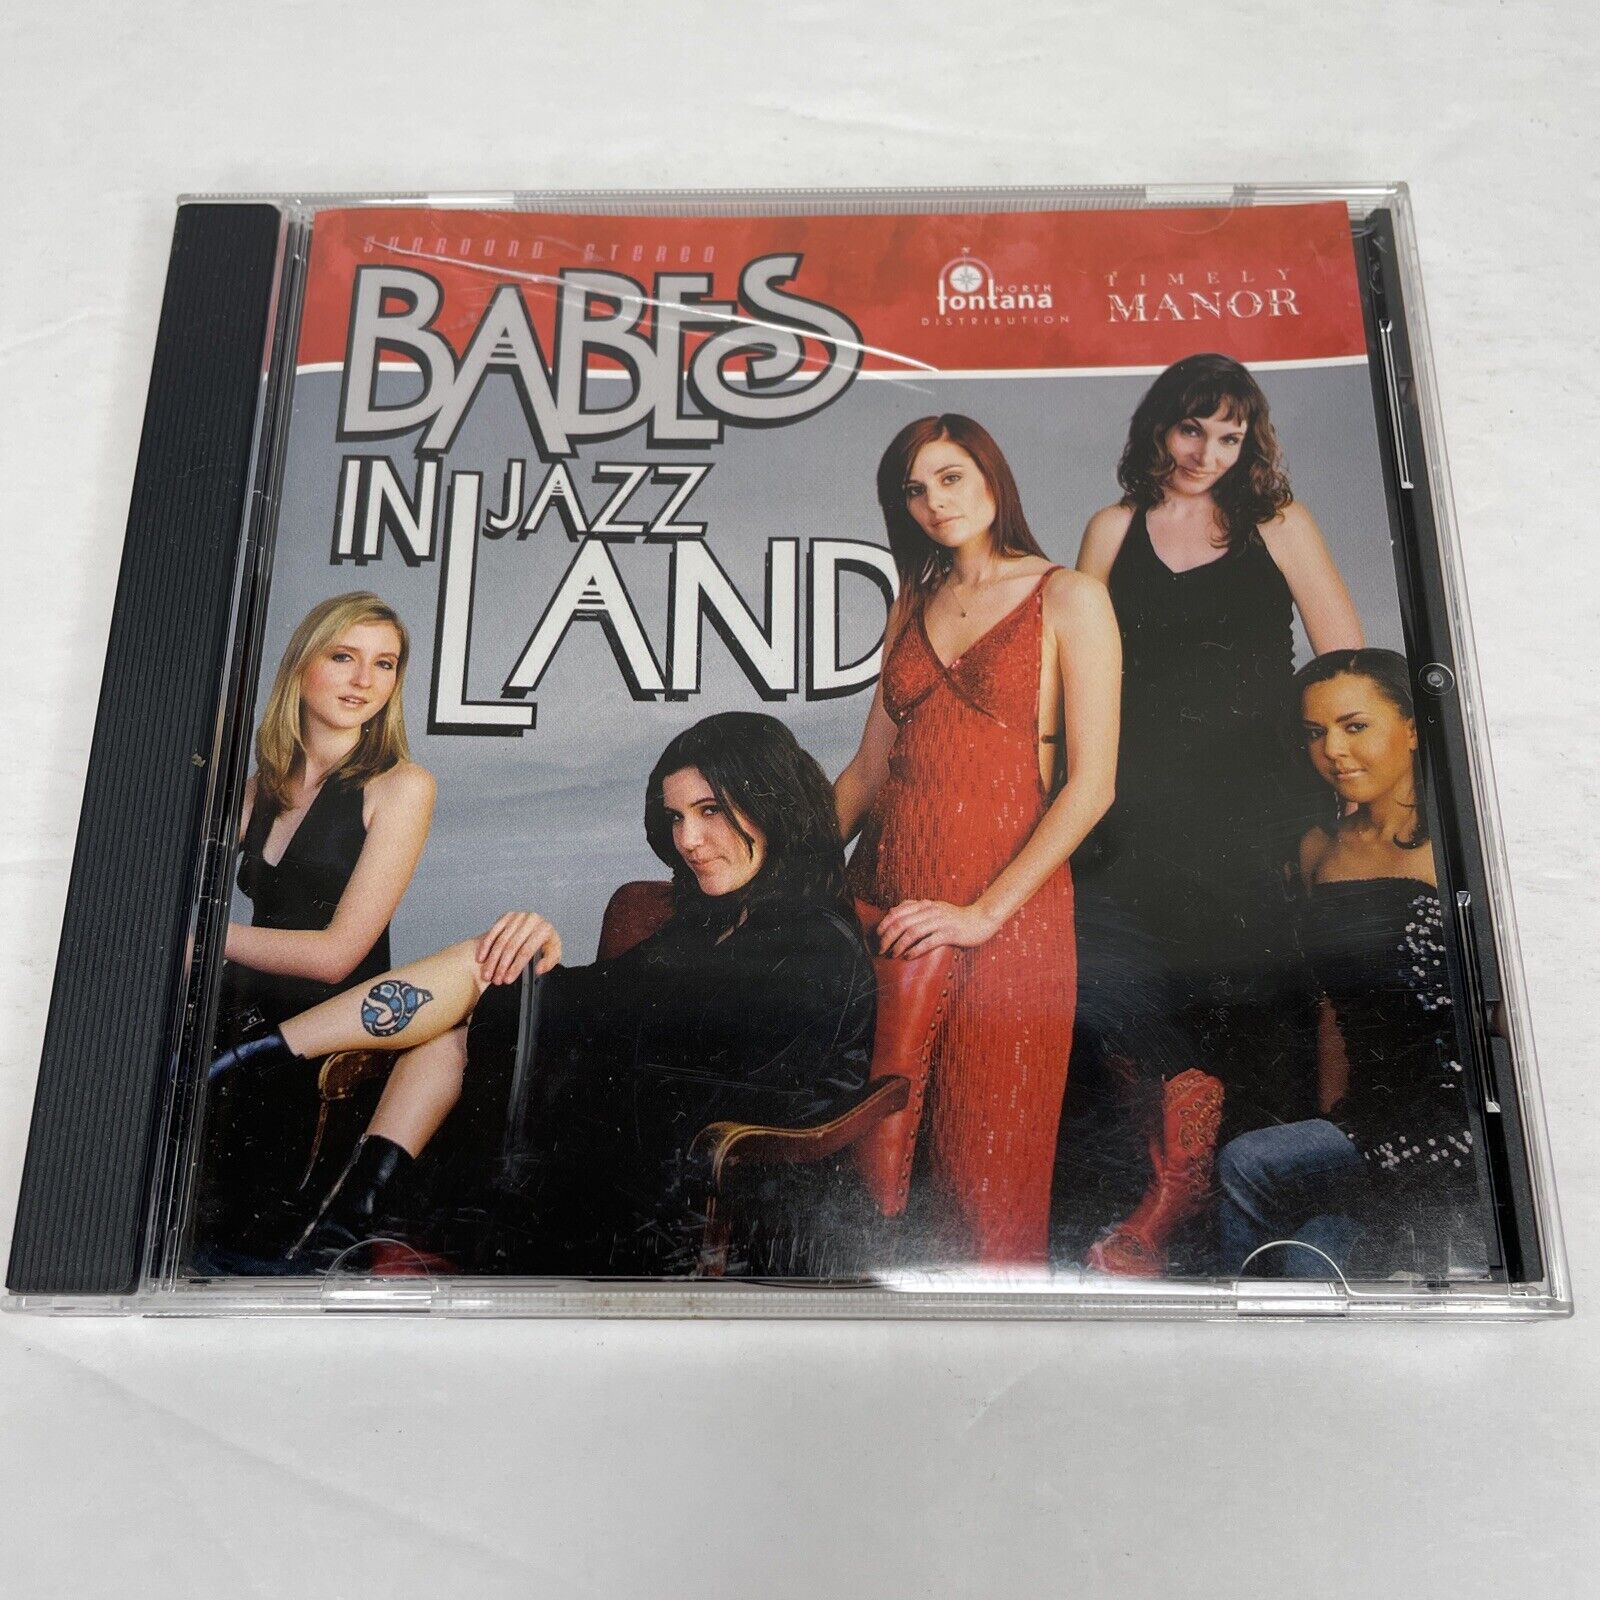 Extremely Rare Babes in Jazzland 2006 CD Produced Before They Were Famous Album